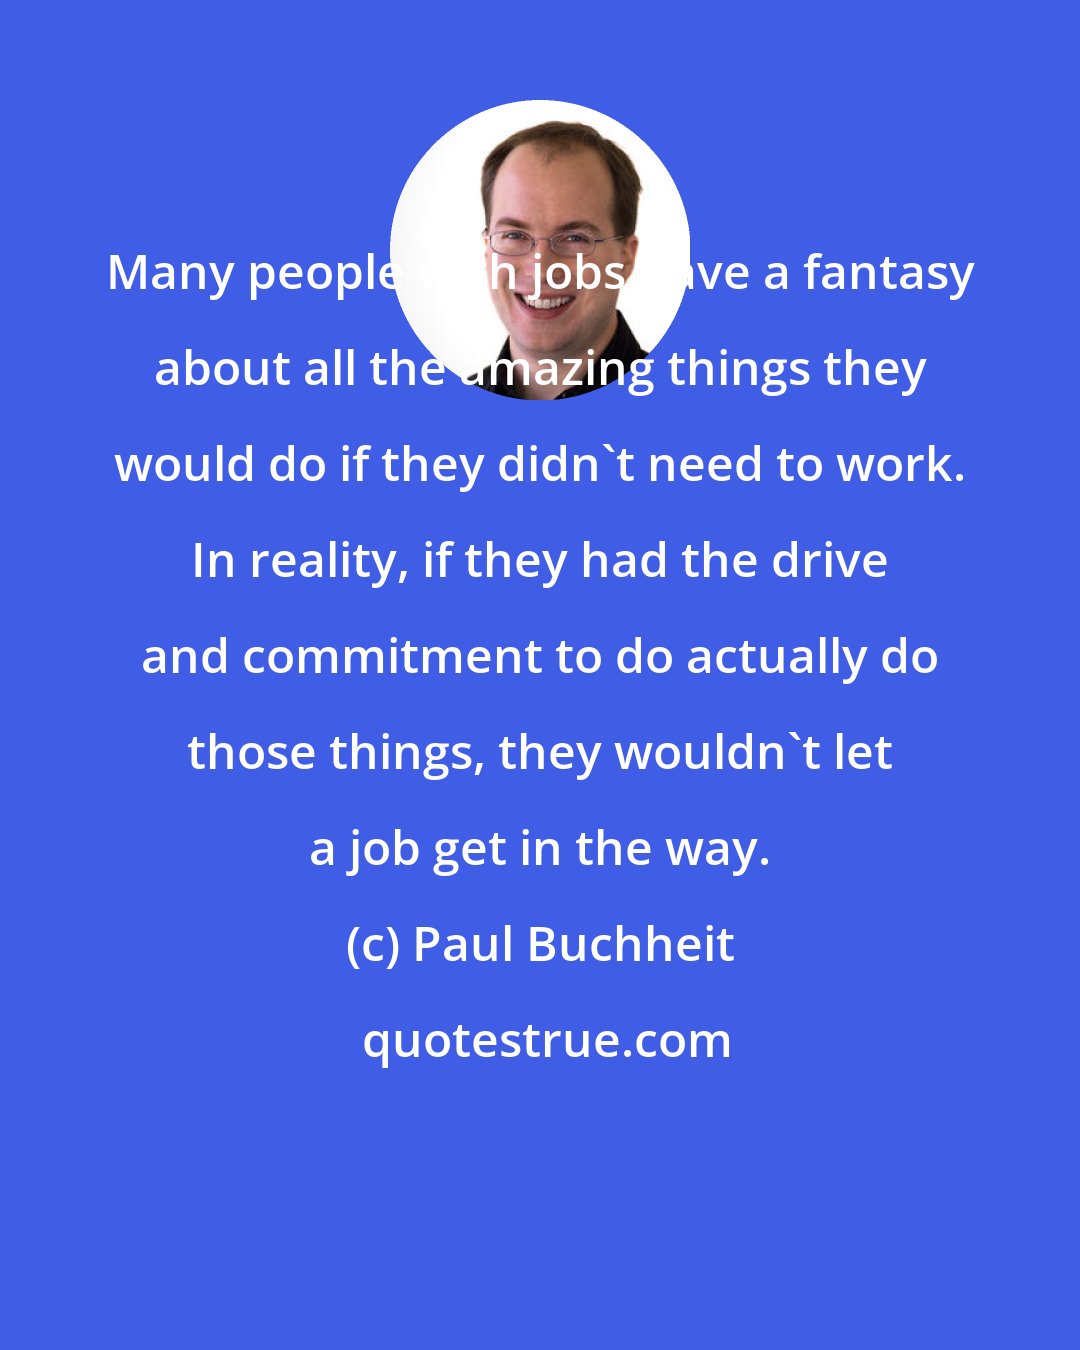 Paul Buchheit: Many people with jobs have a fantasy about all the amazing things they would do if they didn't need to work. In reality, if they had the drive and commitment to do actually do those things, they wouldn't let a job get in the way.